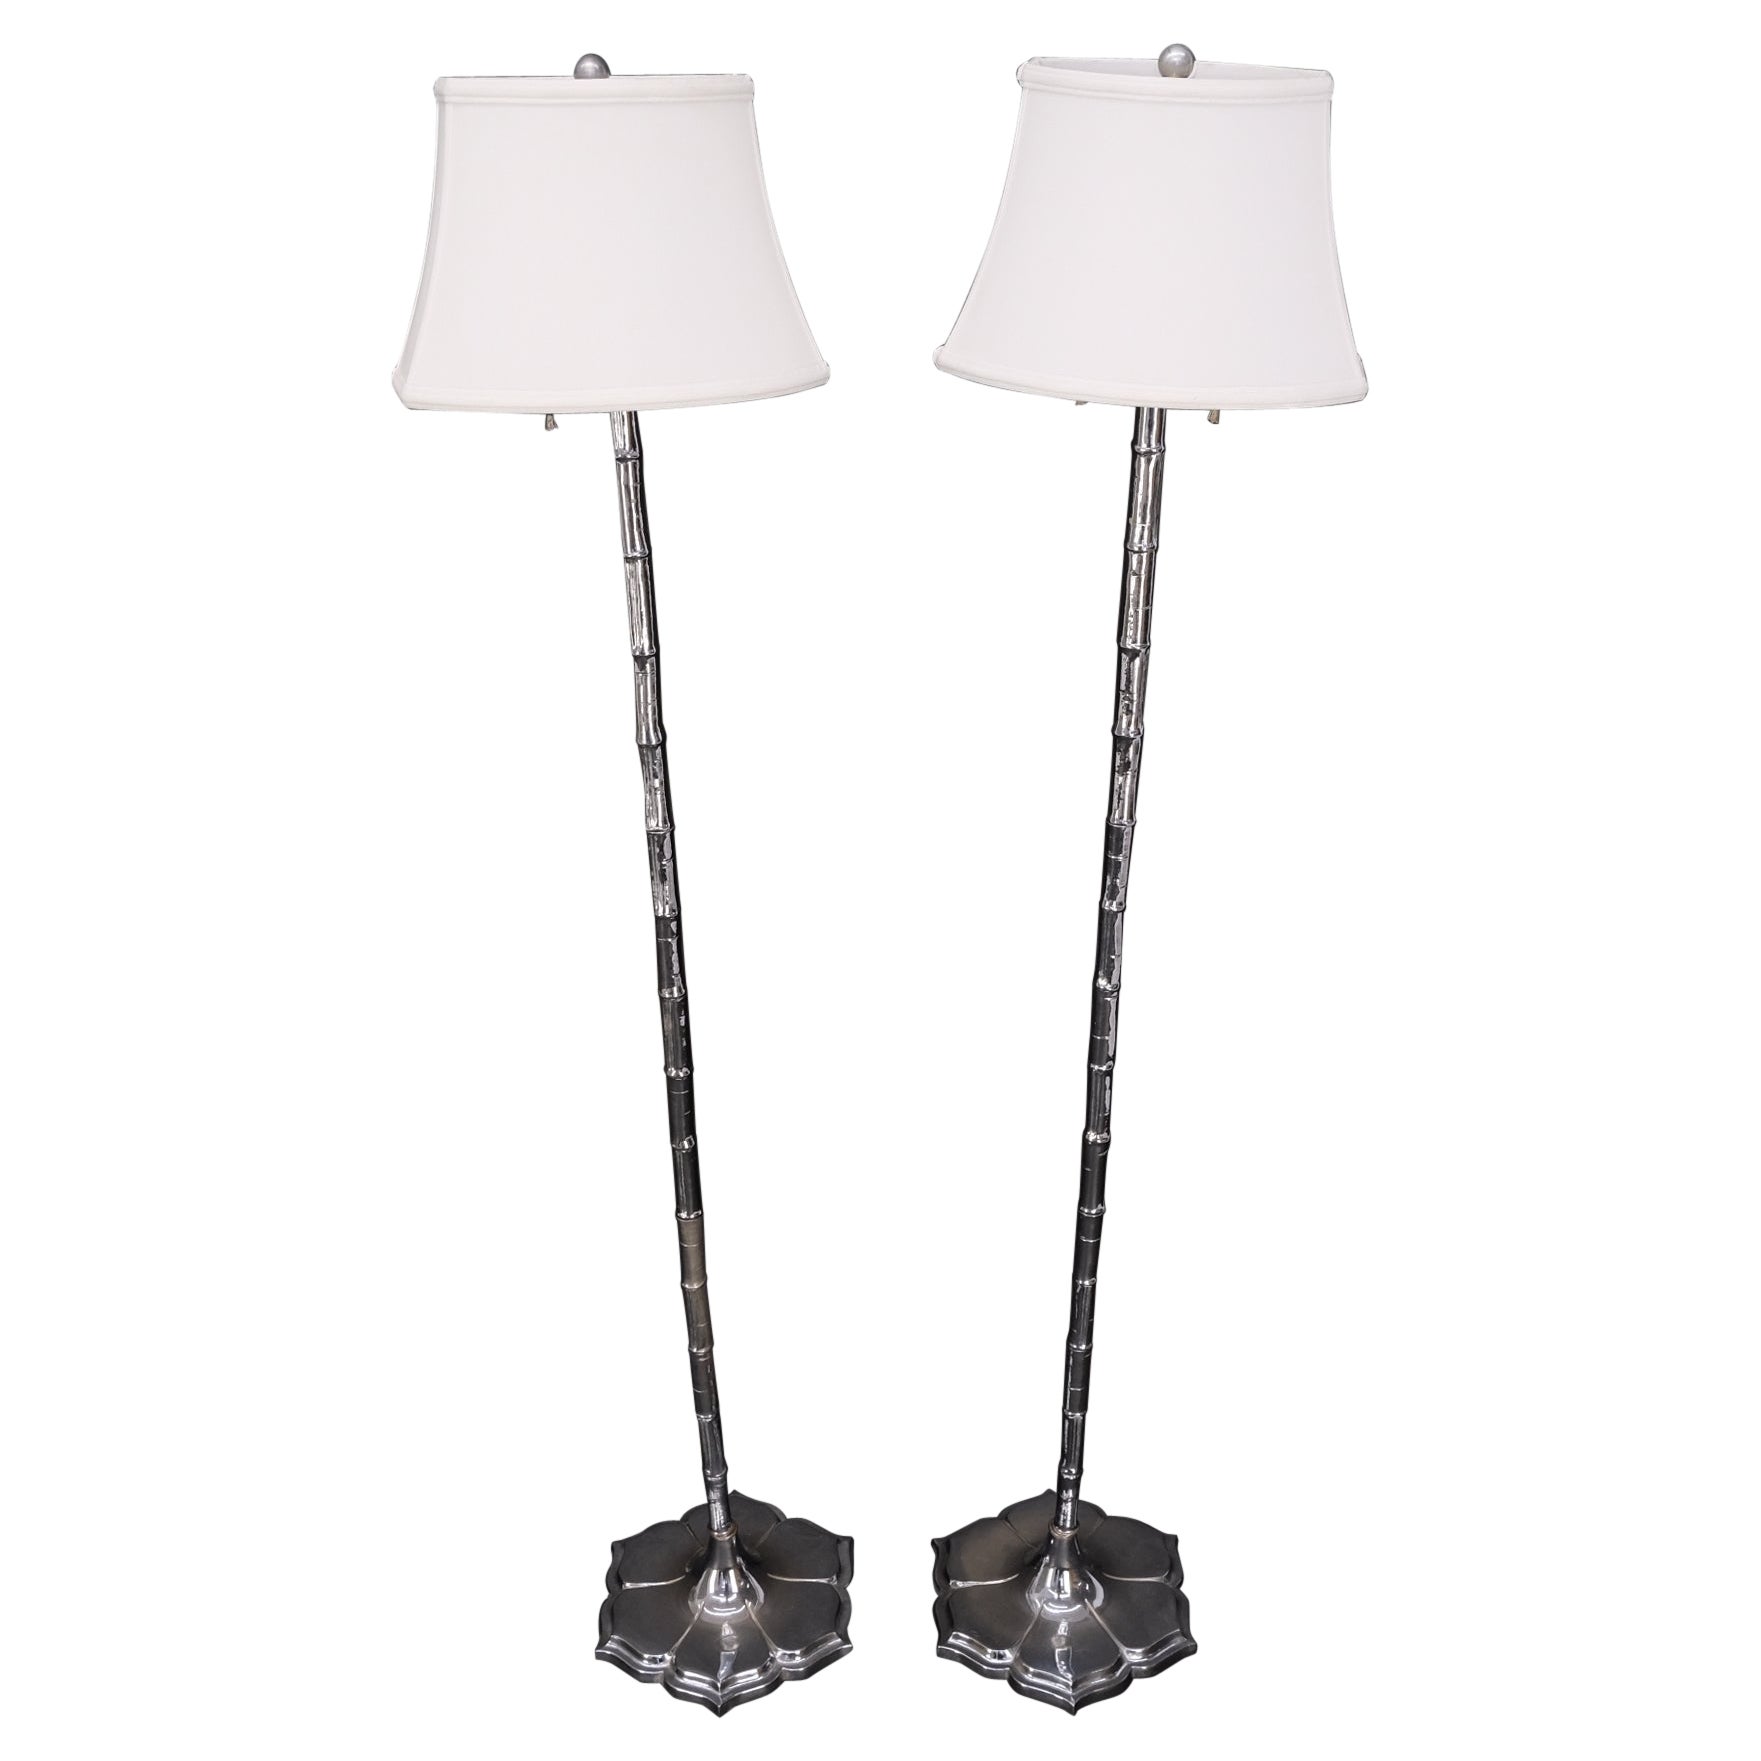 Pair of Cast Lotus Shape Bases Chrome Faux Bamboo Mid-Century Modern Floor Lamps For Sale